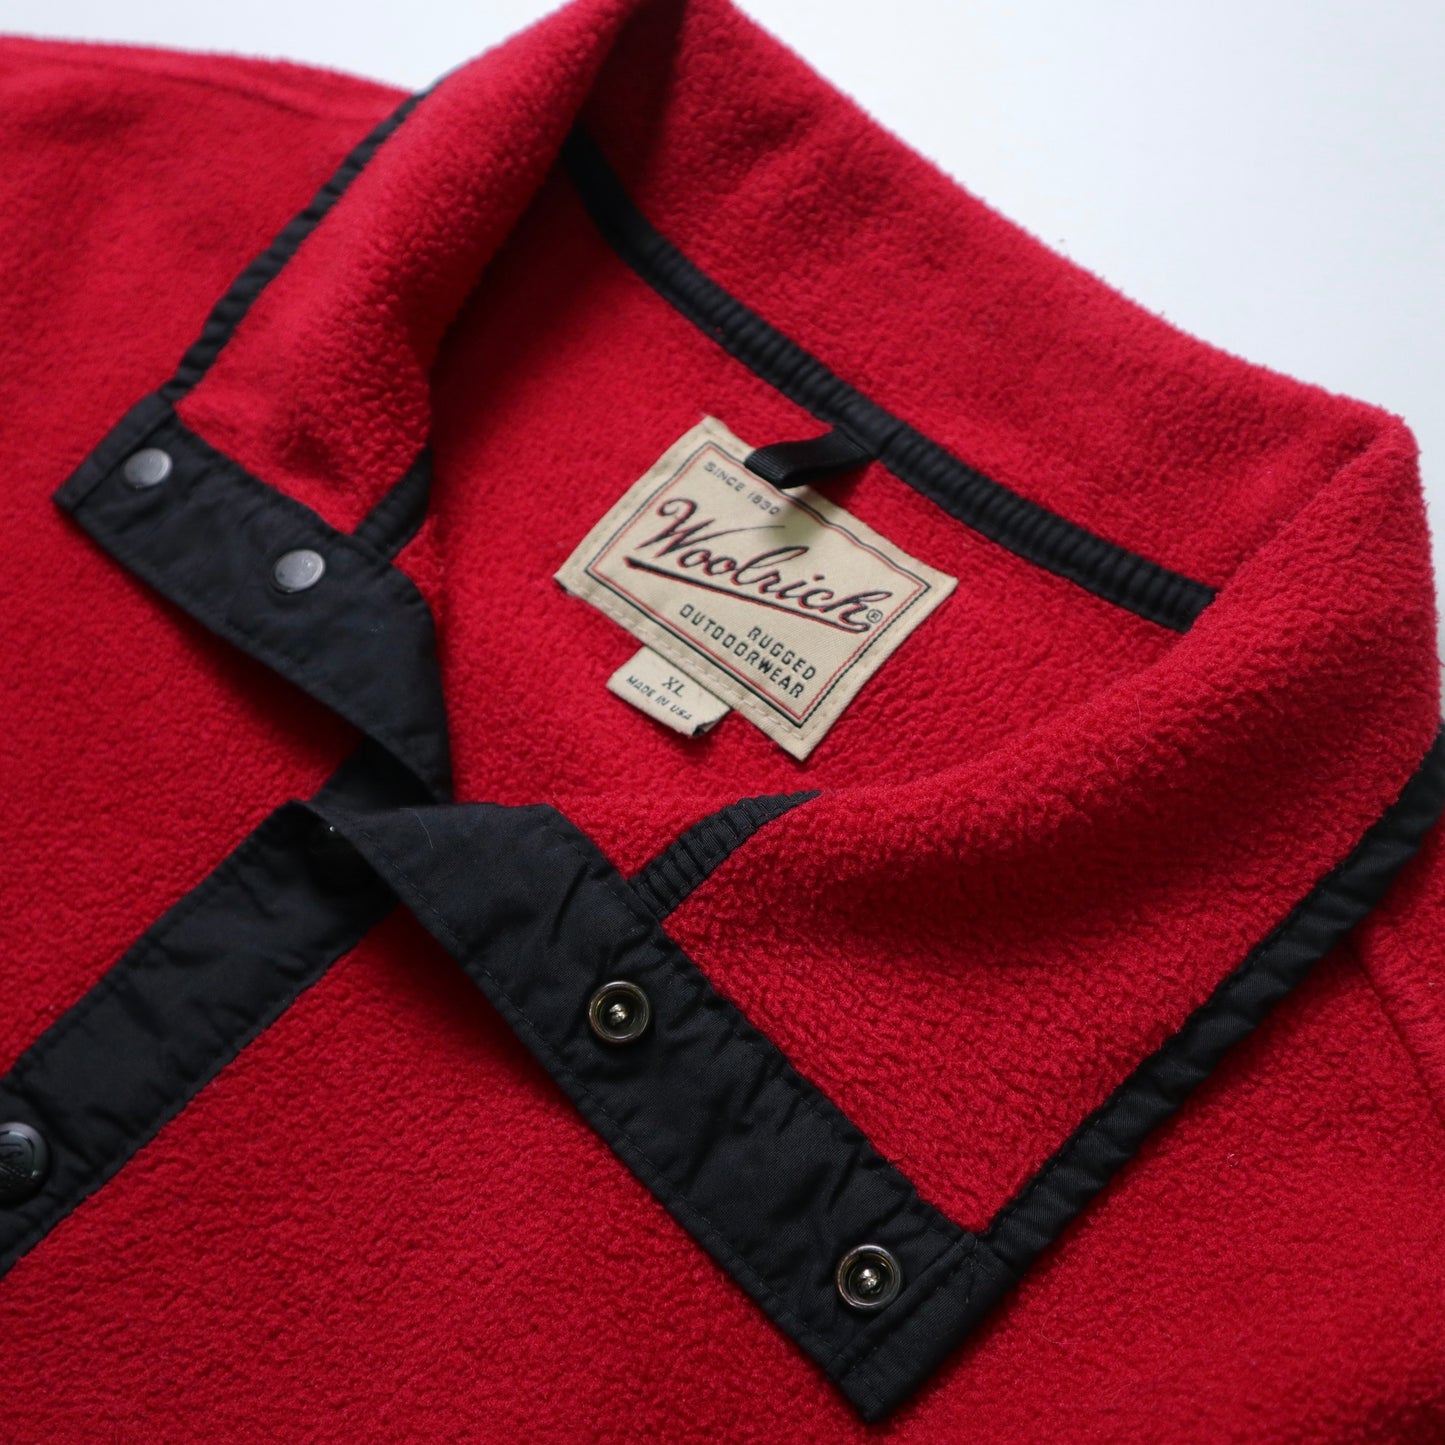 90's WOOLRICH Red Fleece Pullover Made in the USA